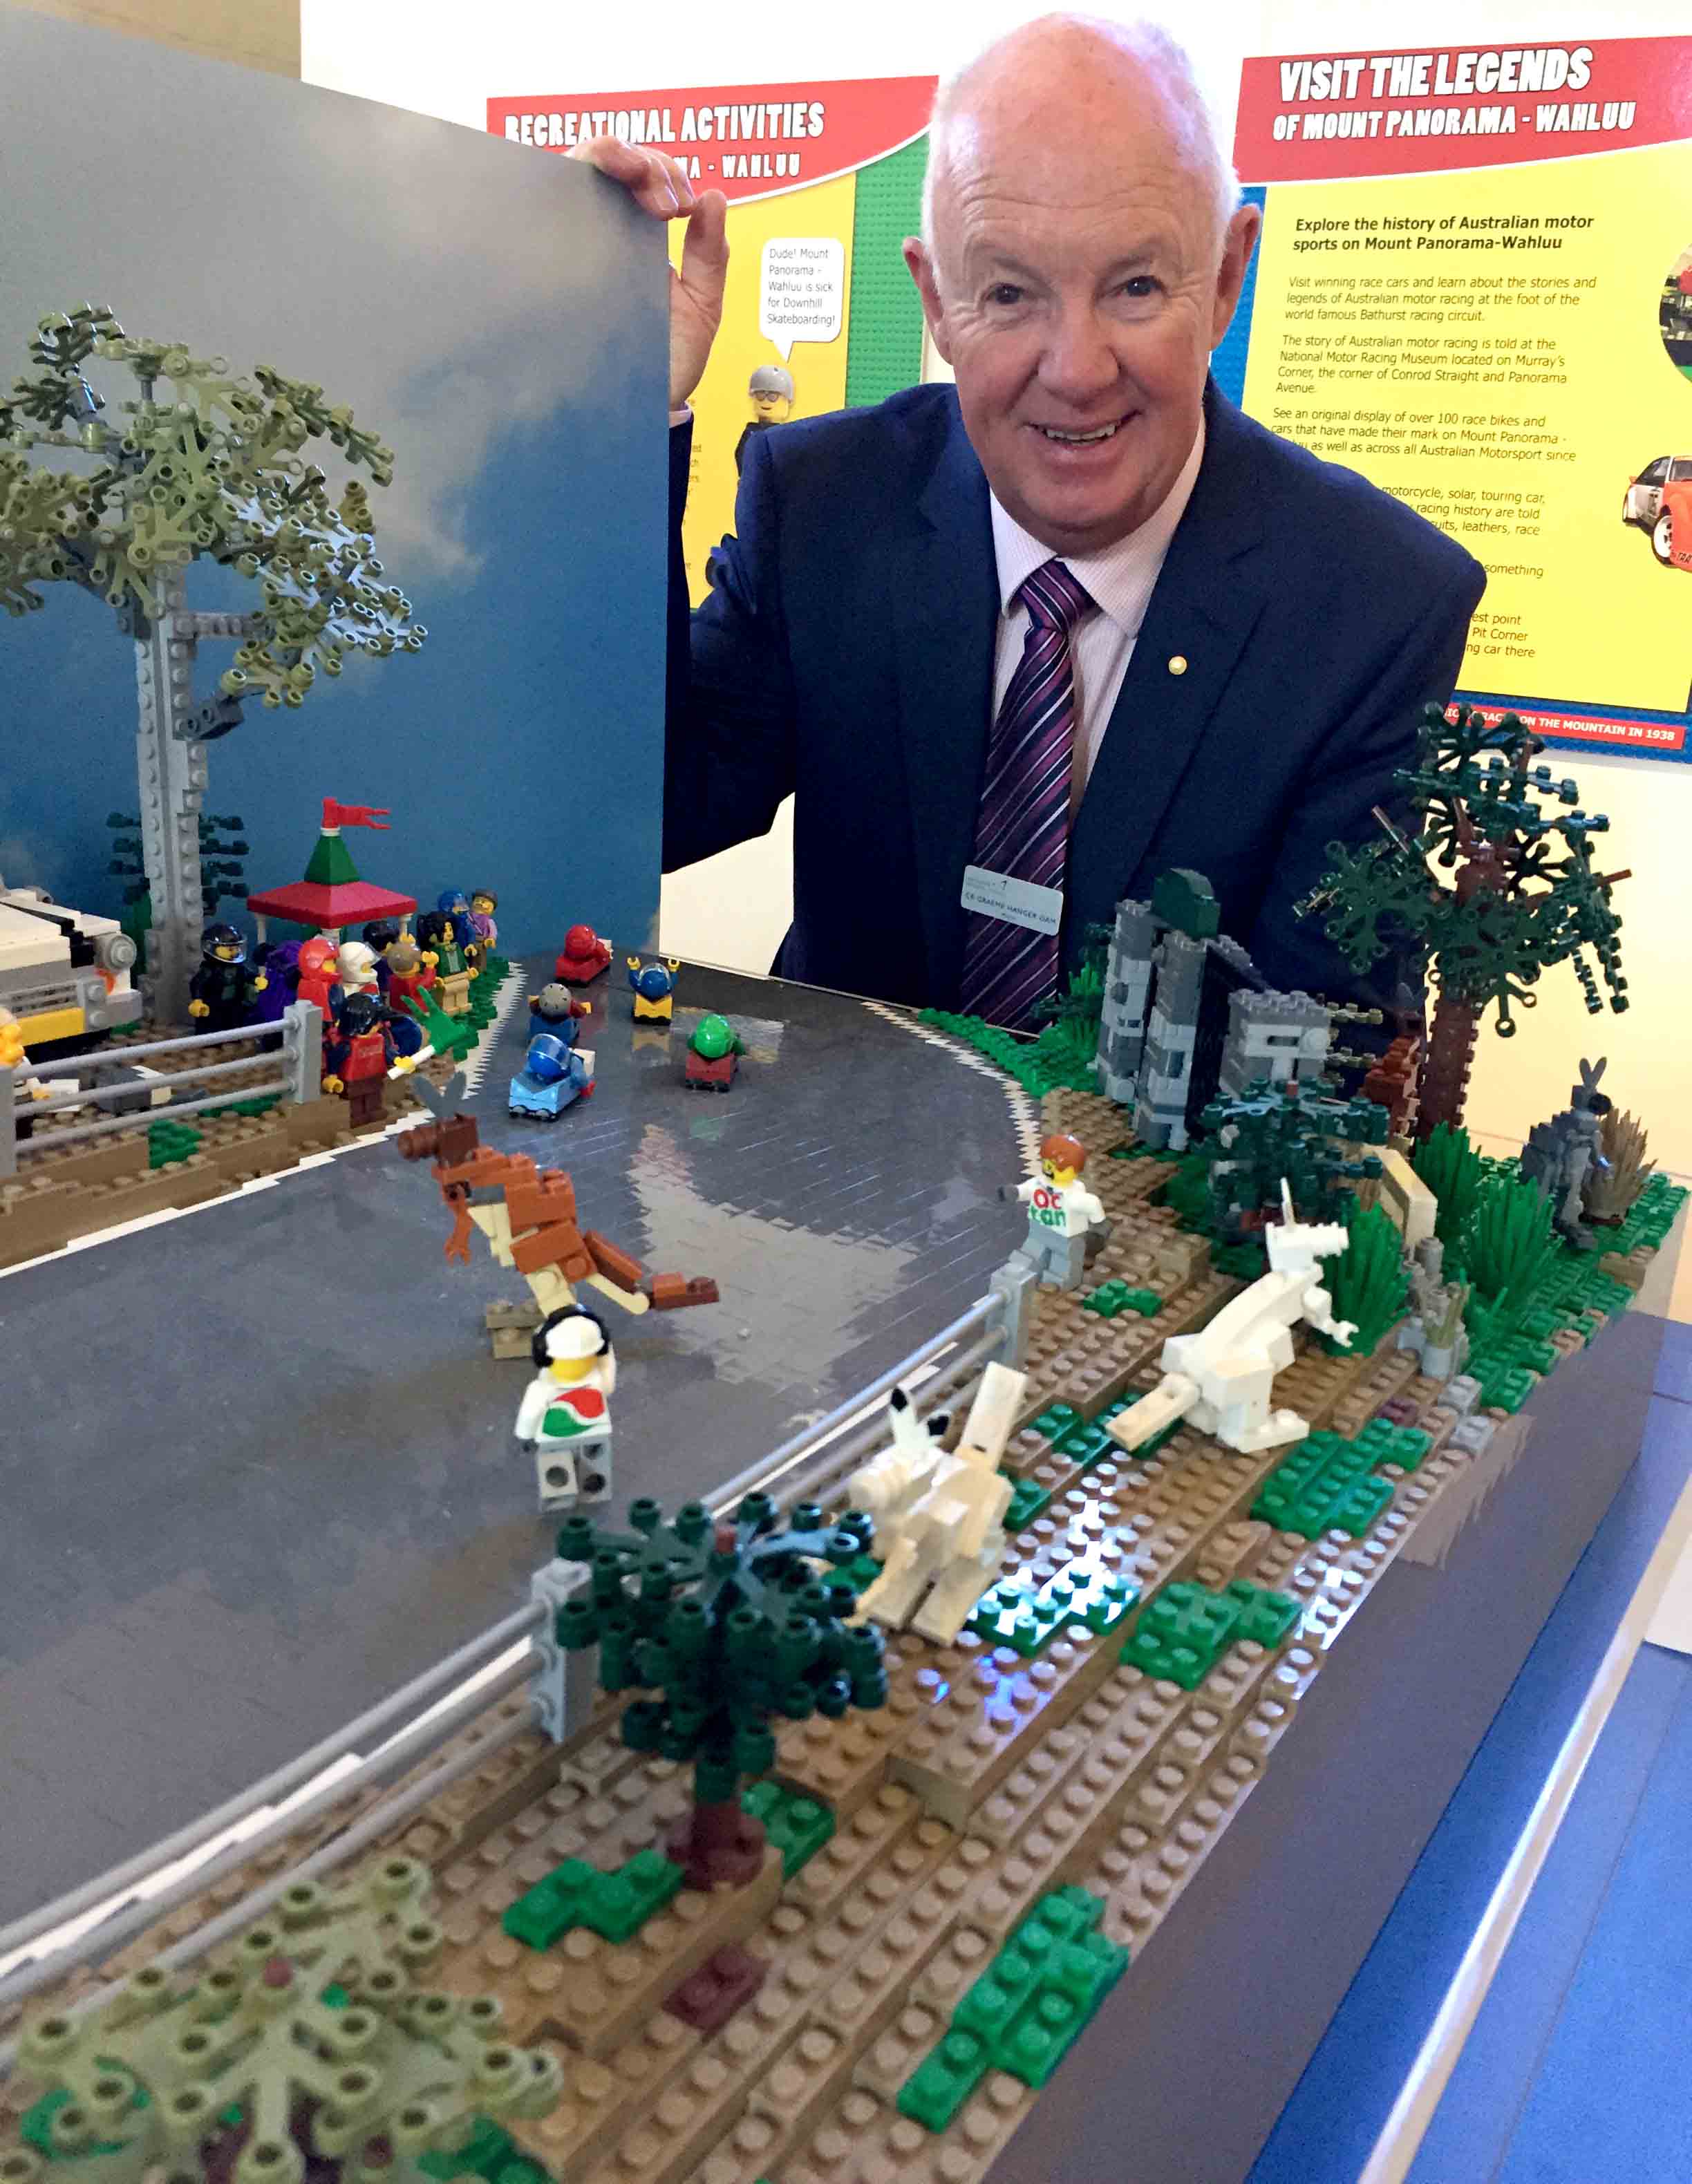 Bathurst Regional Council Twitter: "Visit the Mount Panorama-Wahluu Lego model at the Australian Fossil and Mineral Museum #AFMM https://t.co/NjFnYIMorP" /